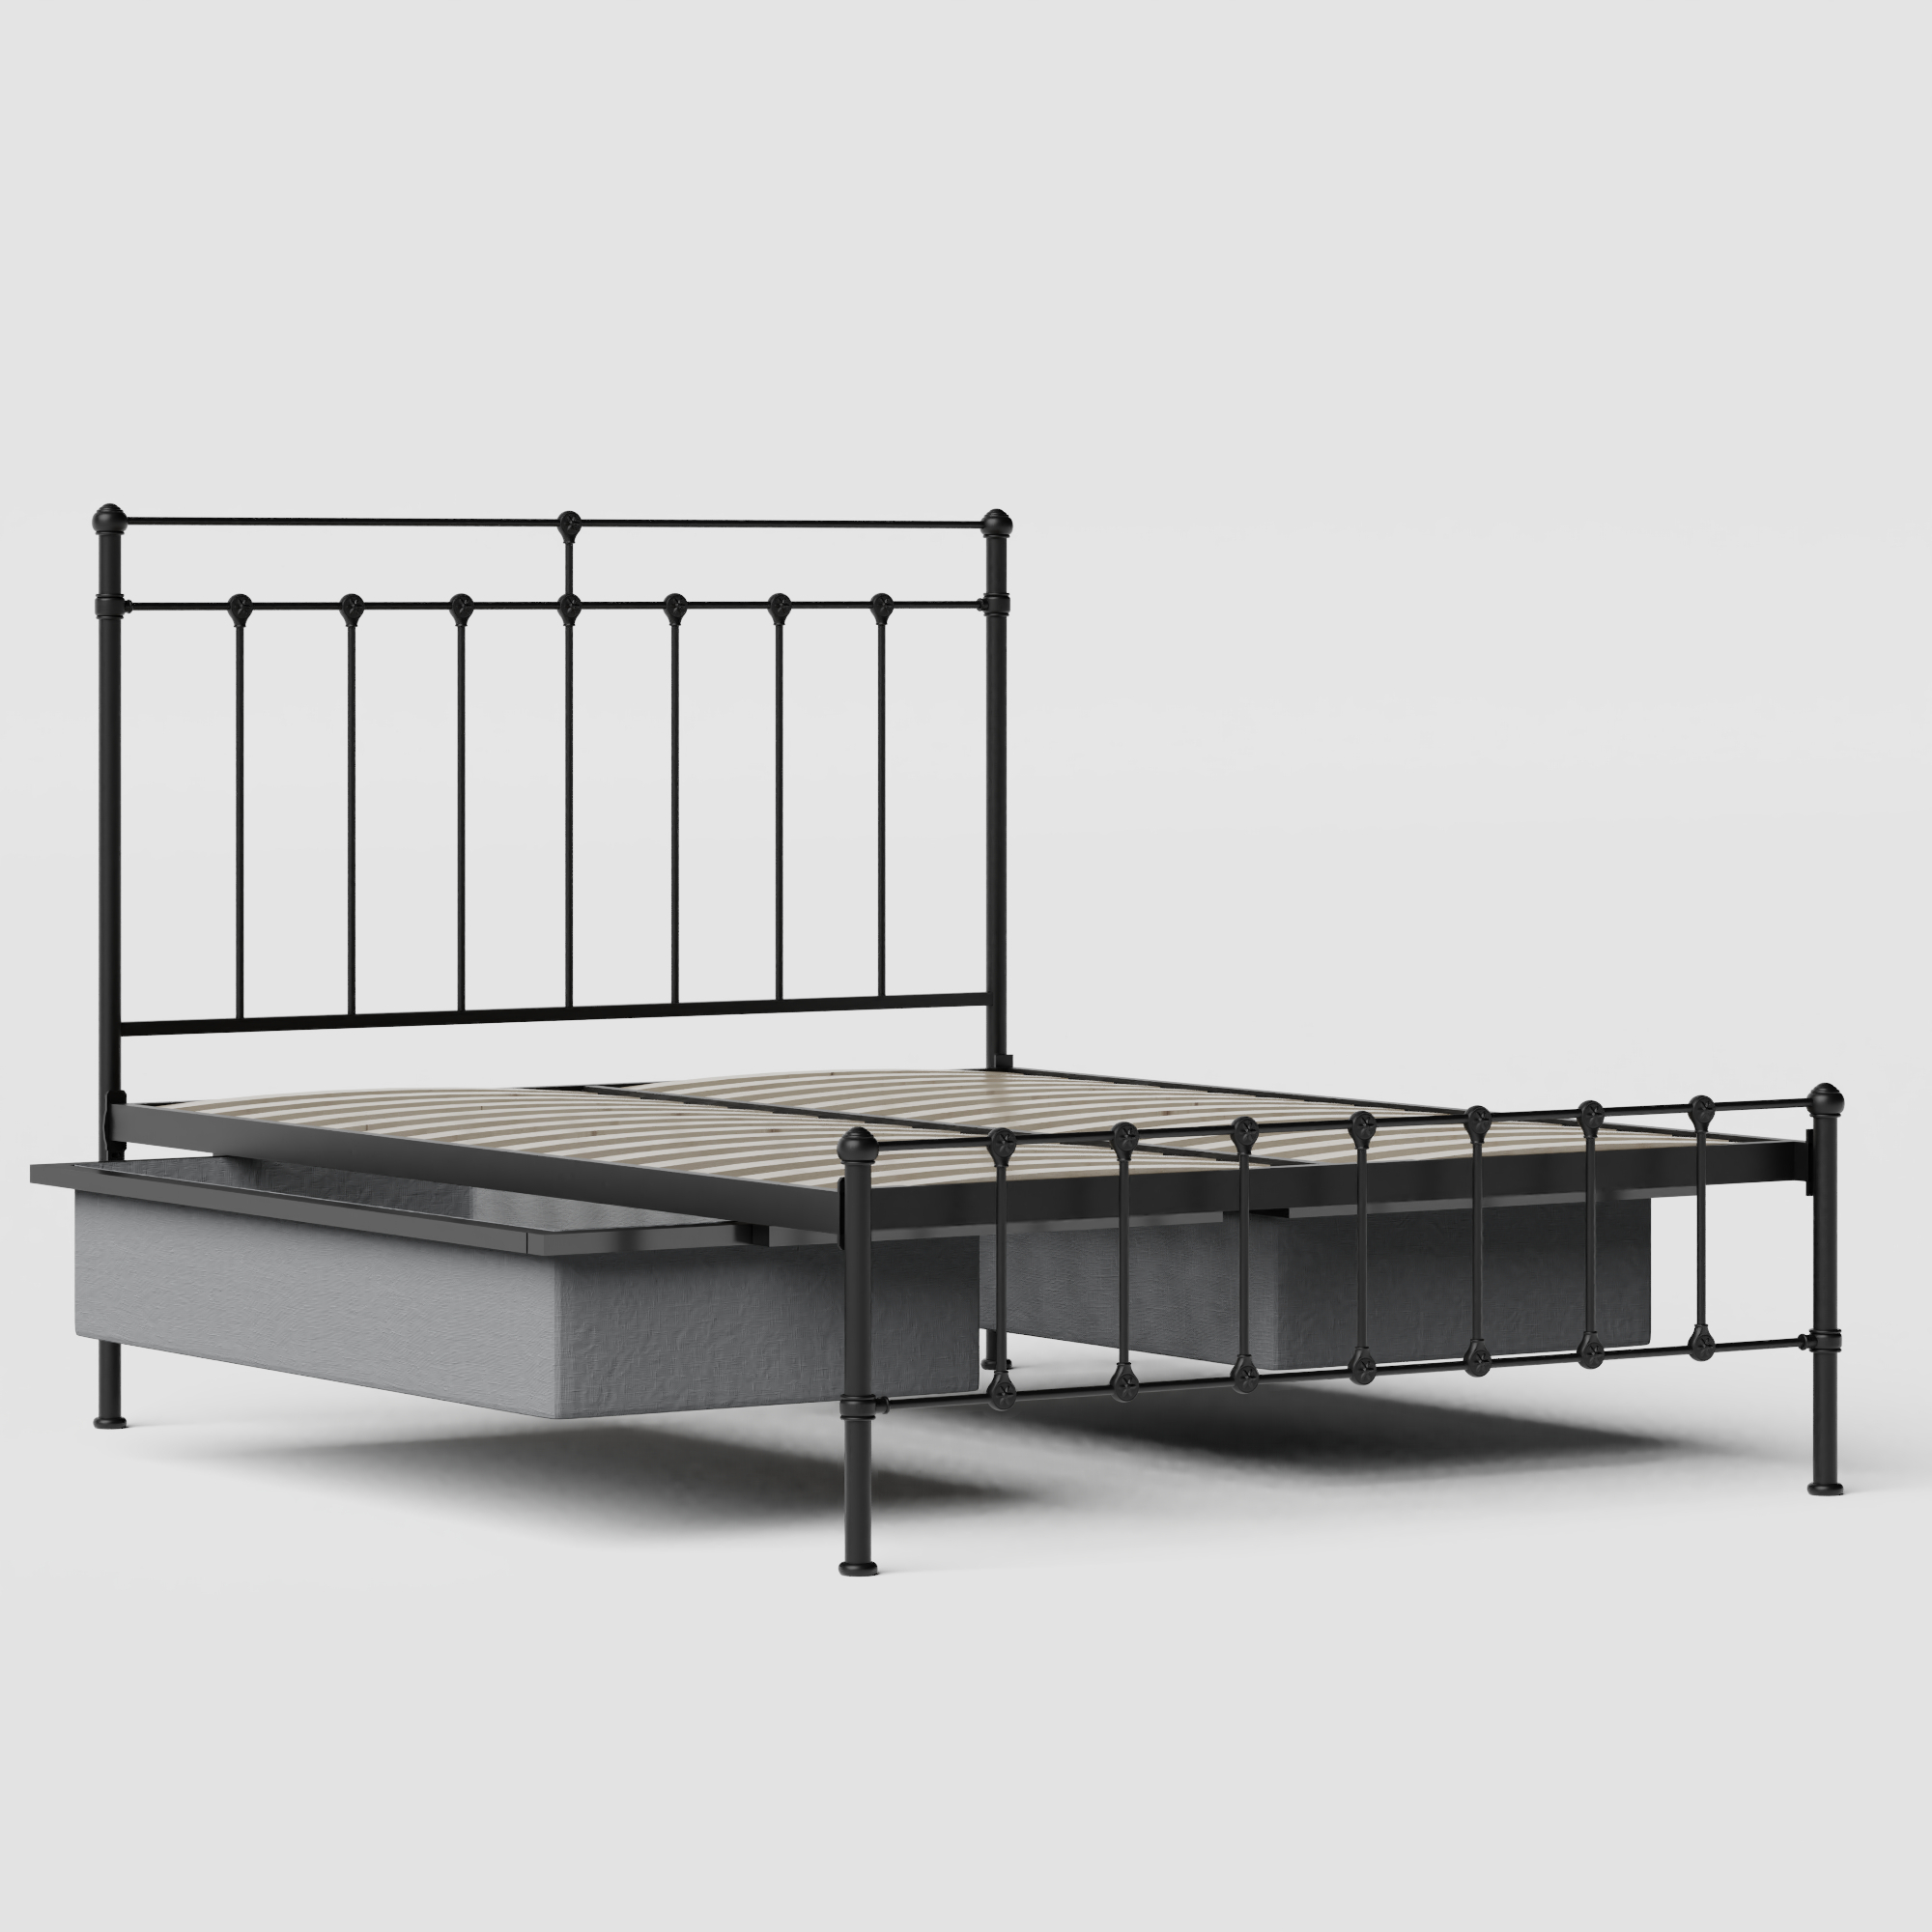 Ashley iron/metal bed in black with drawers